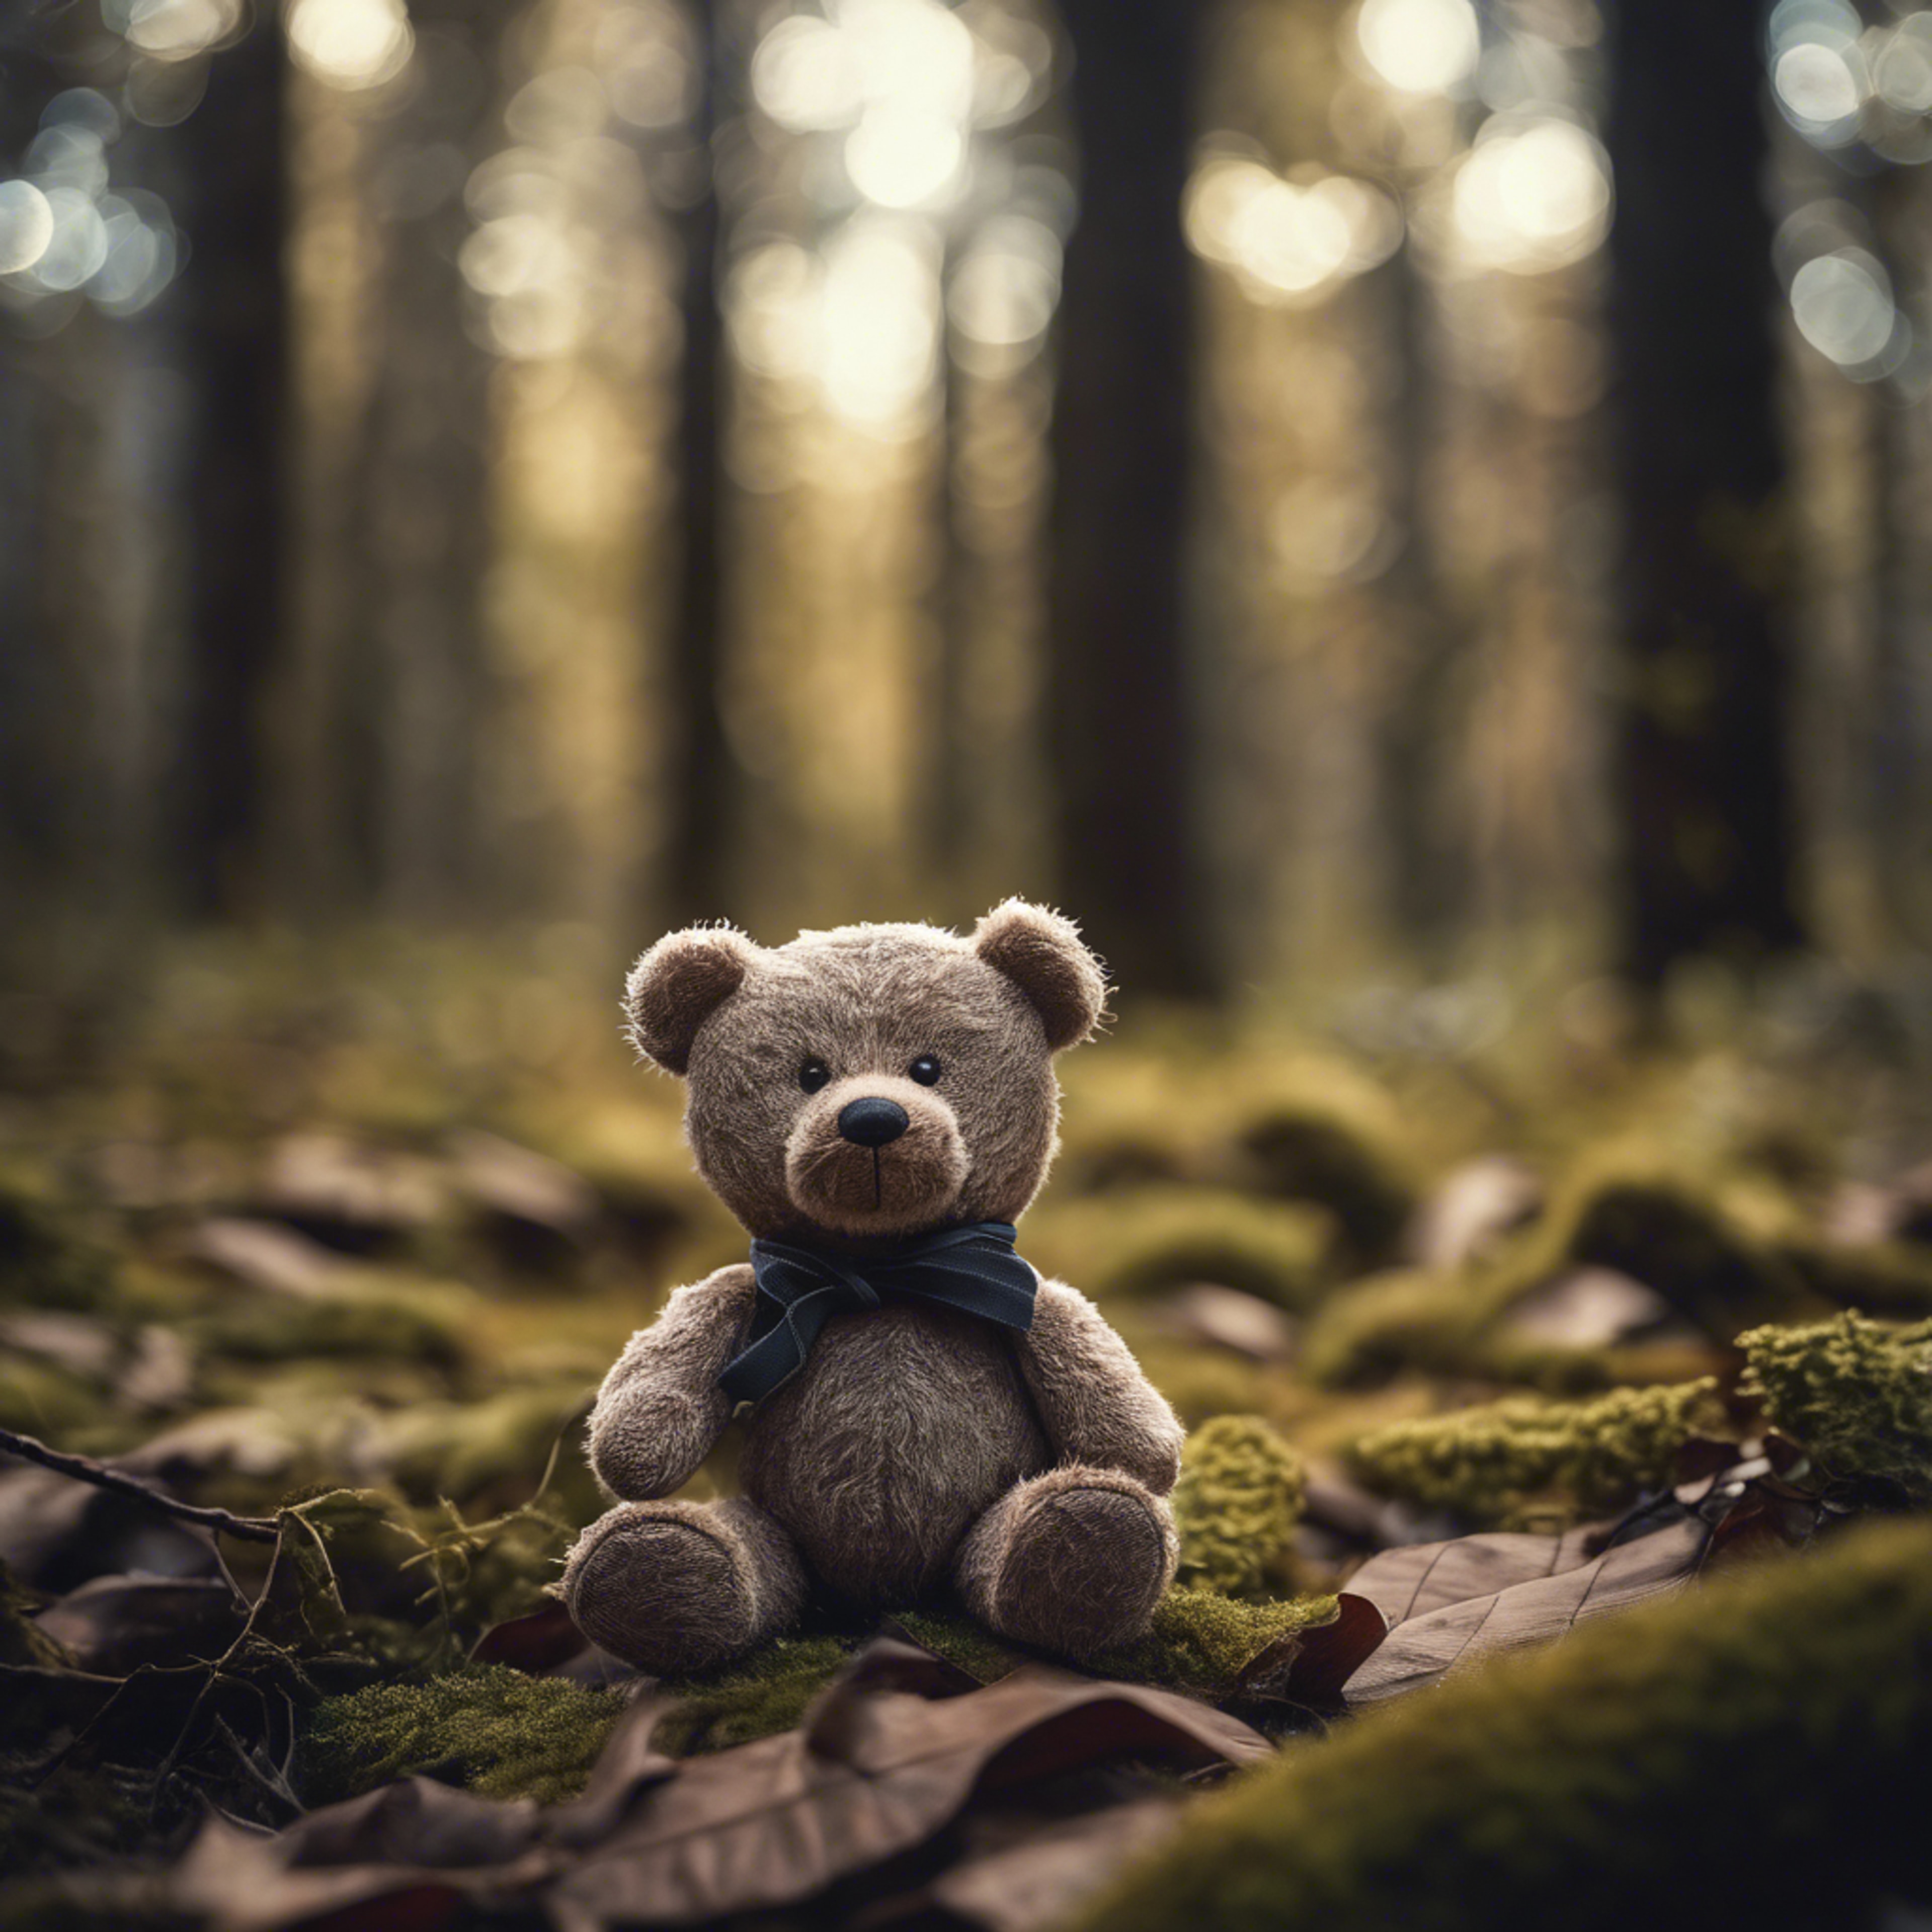 A teddy bear lost and alone in a dark forest. Kertas dinding[4d225efade314682baea]